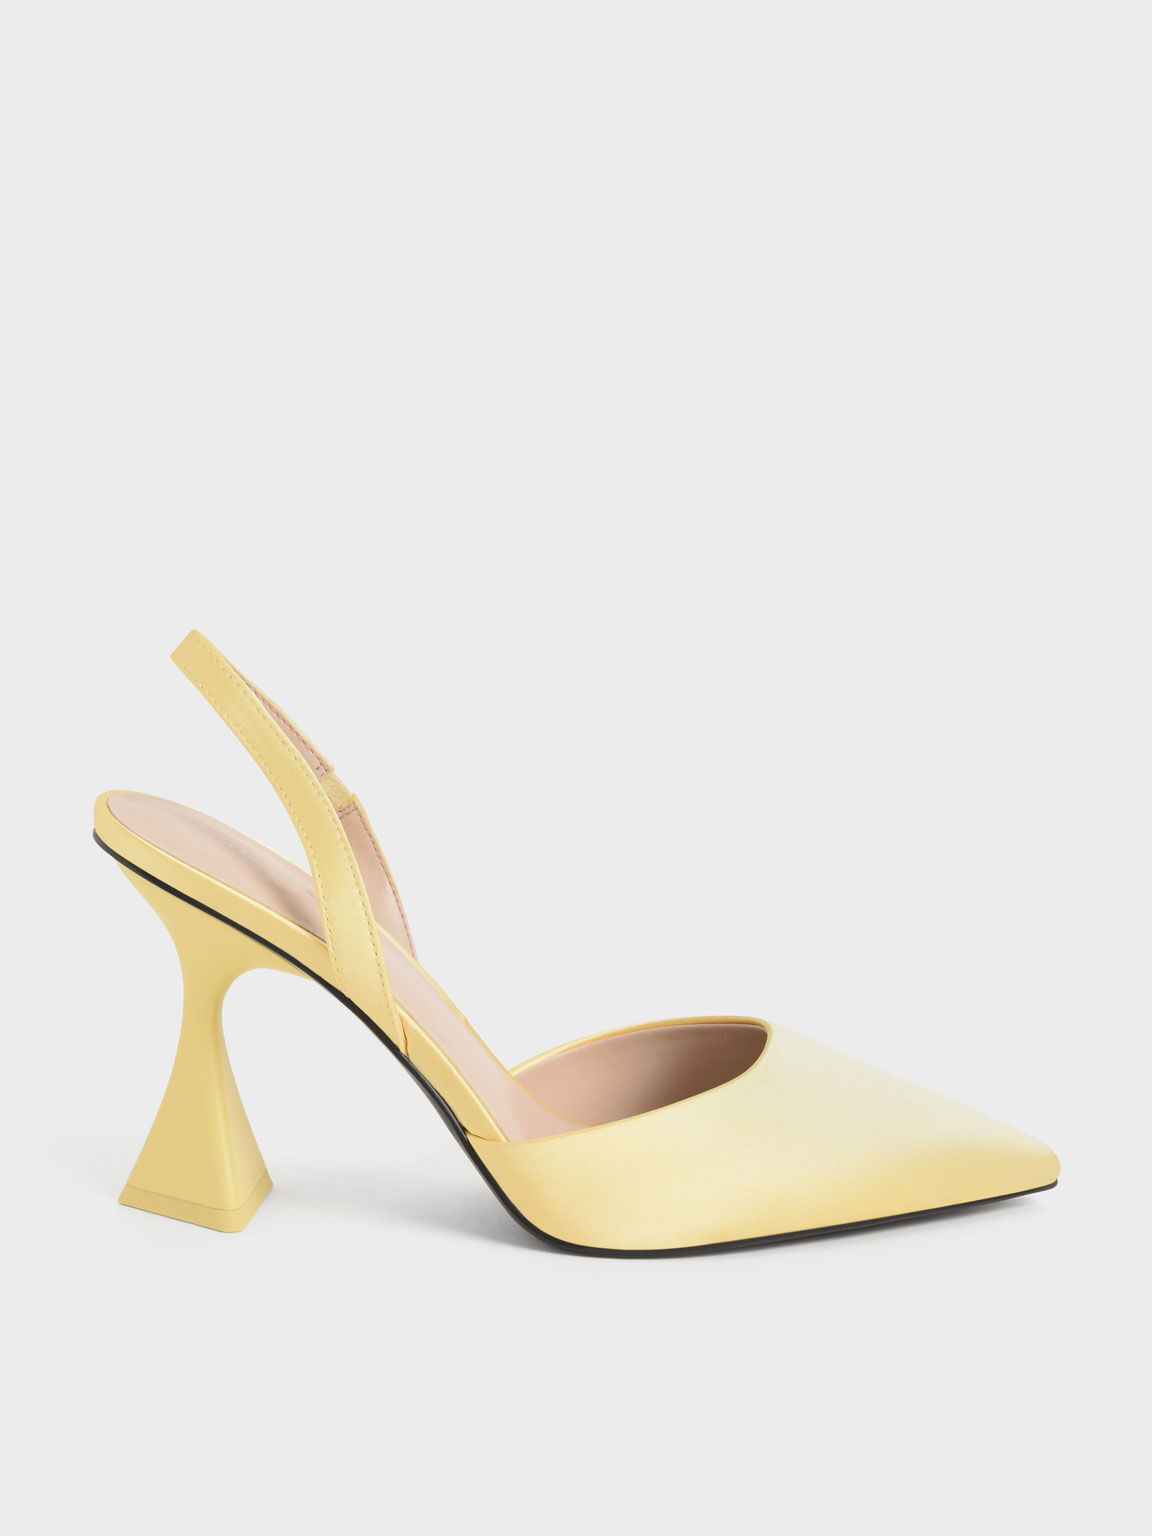 Recycled Polyester Slingback Pumps, Yellow, hi-res